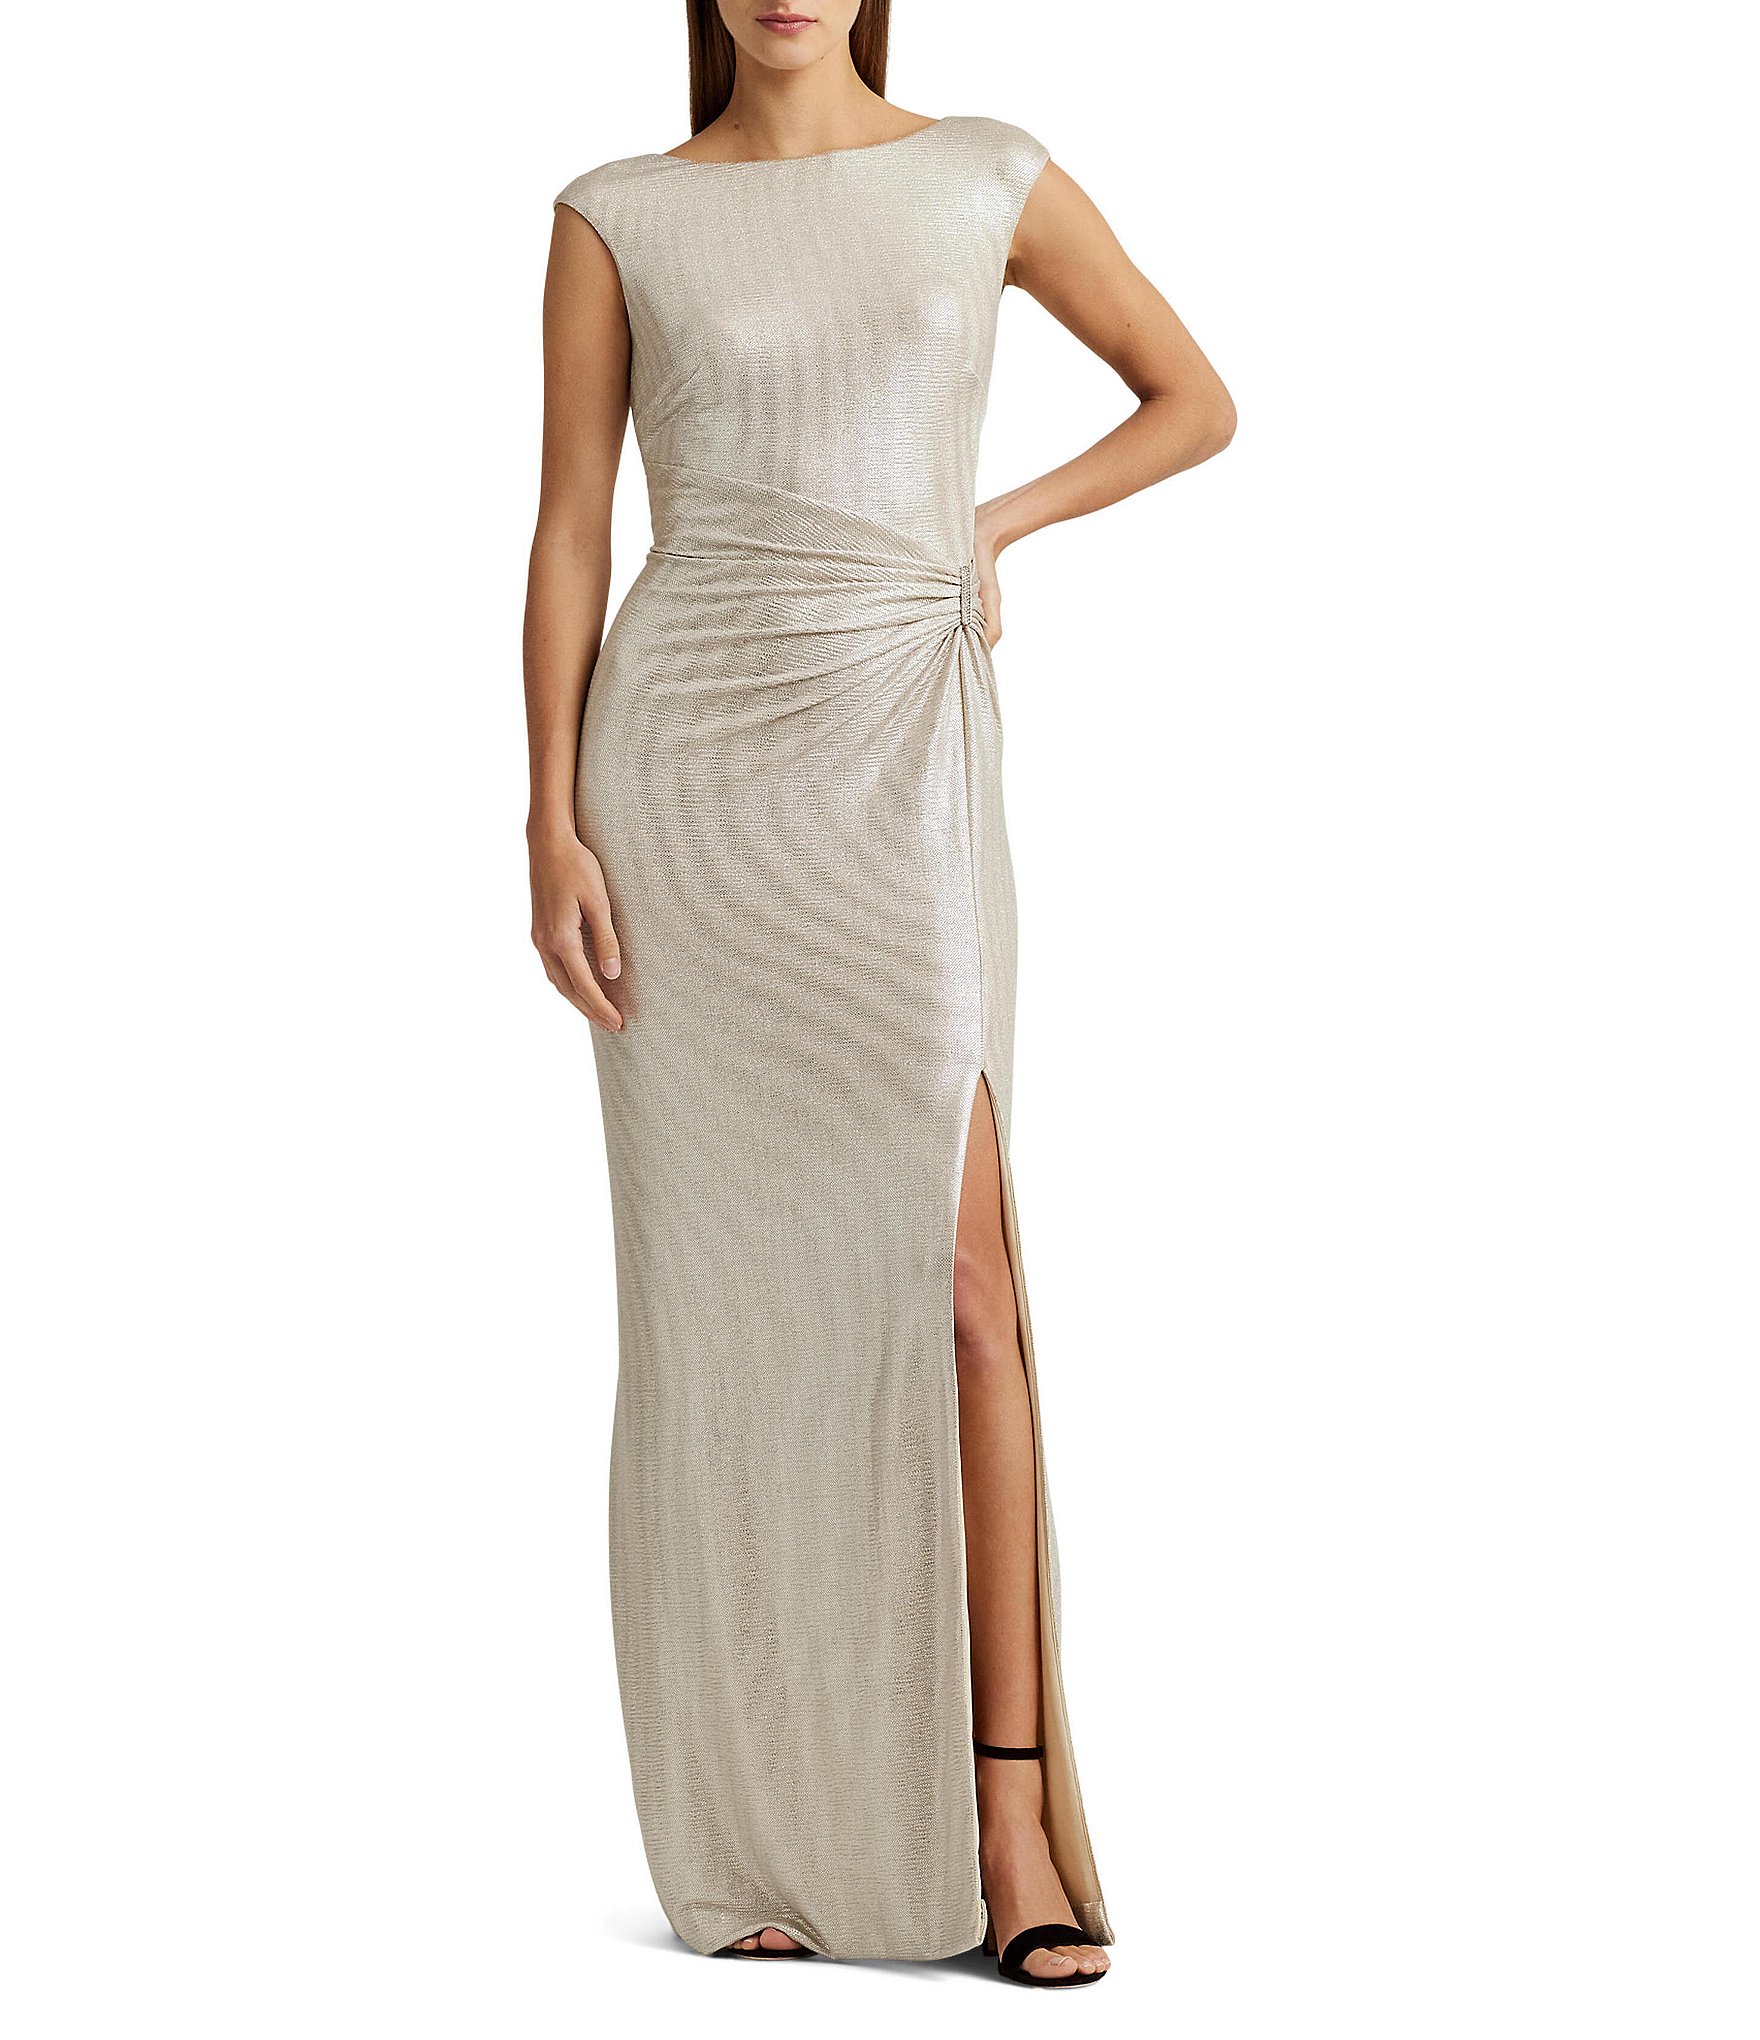 Ralph Lauren white and silver formal dress | Silver formal dresses, Lauren  white, White and silver dress